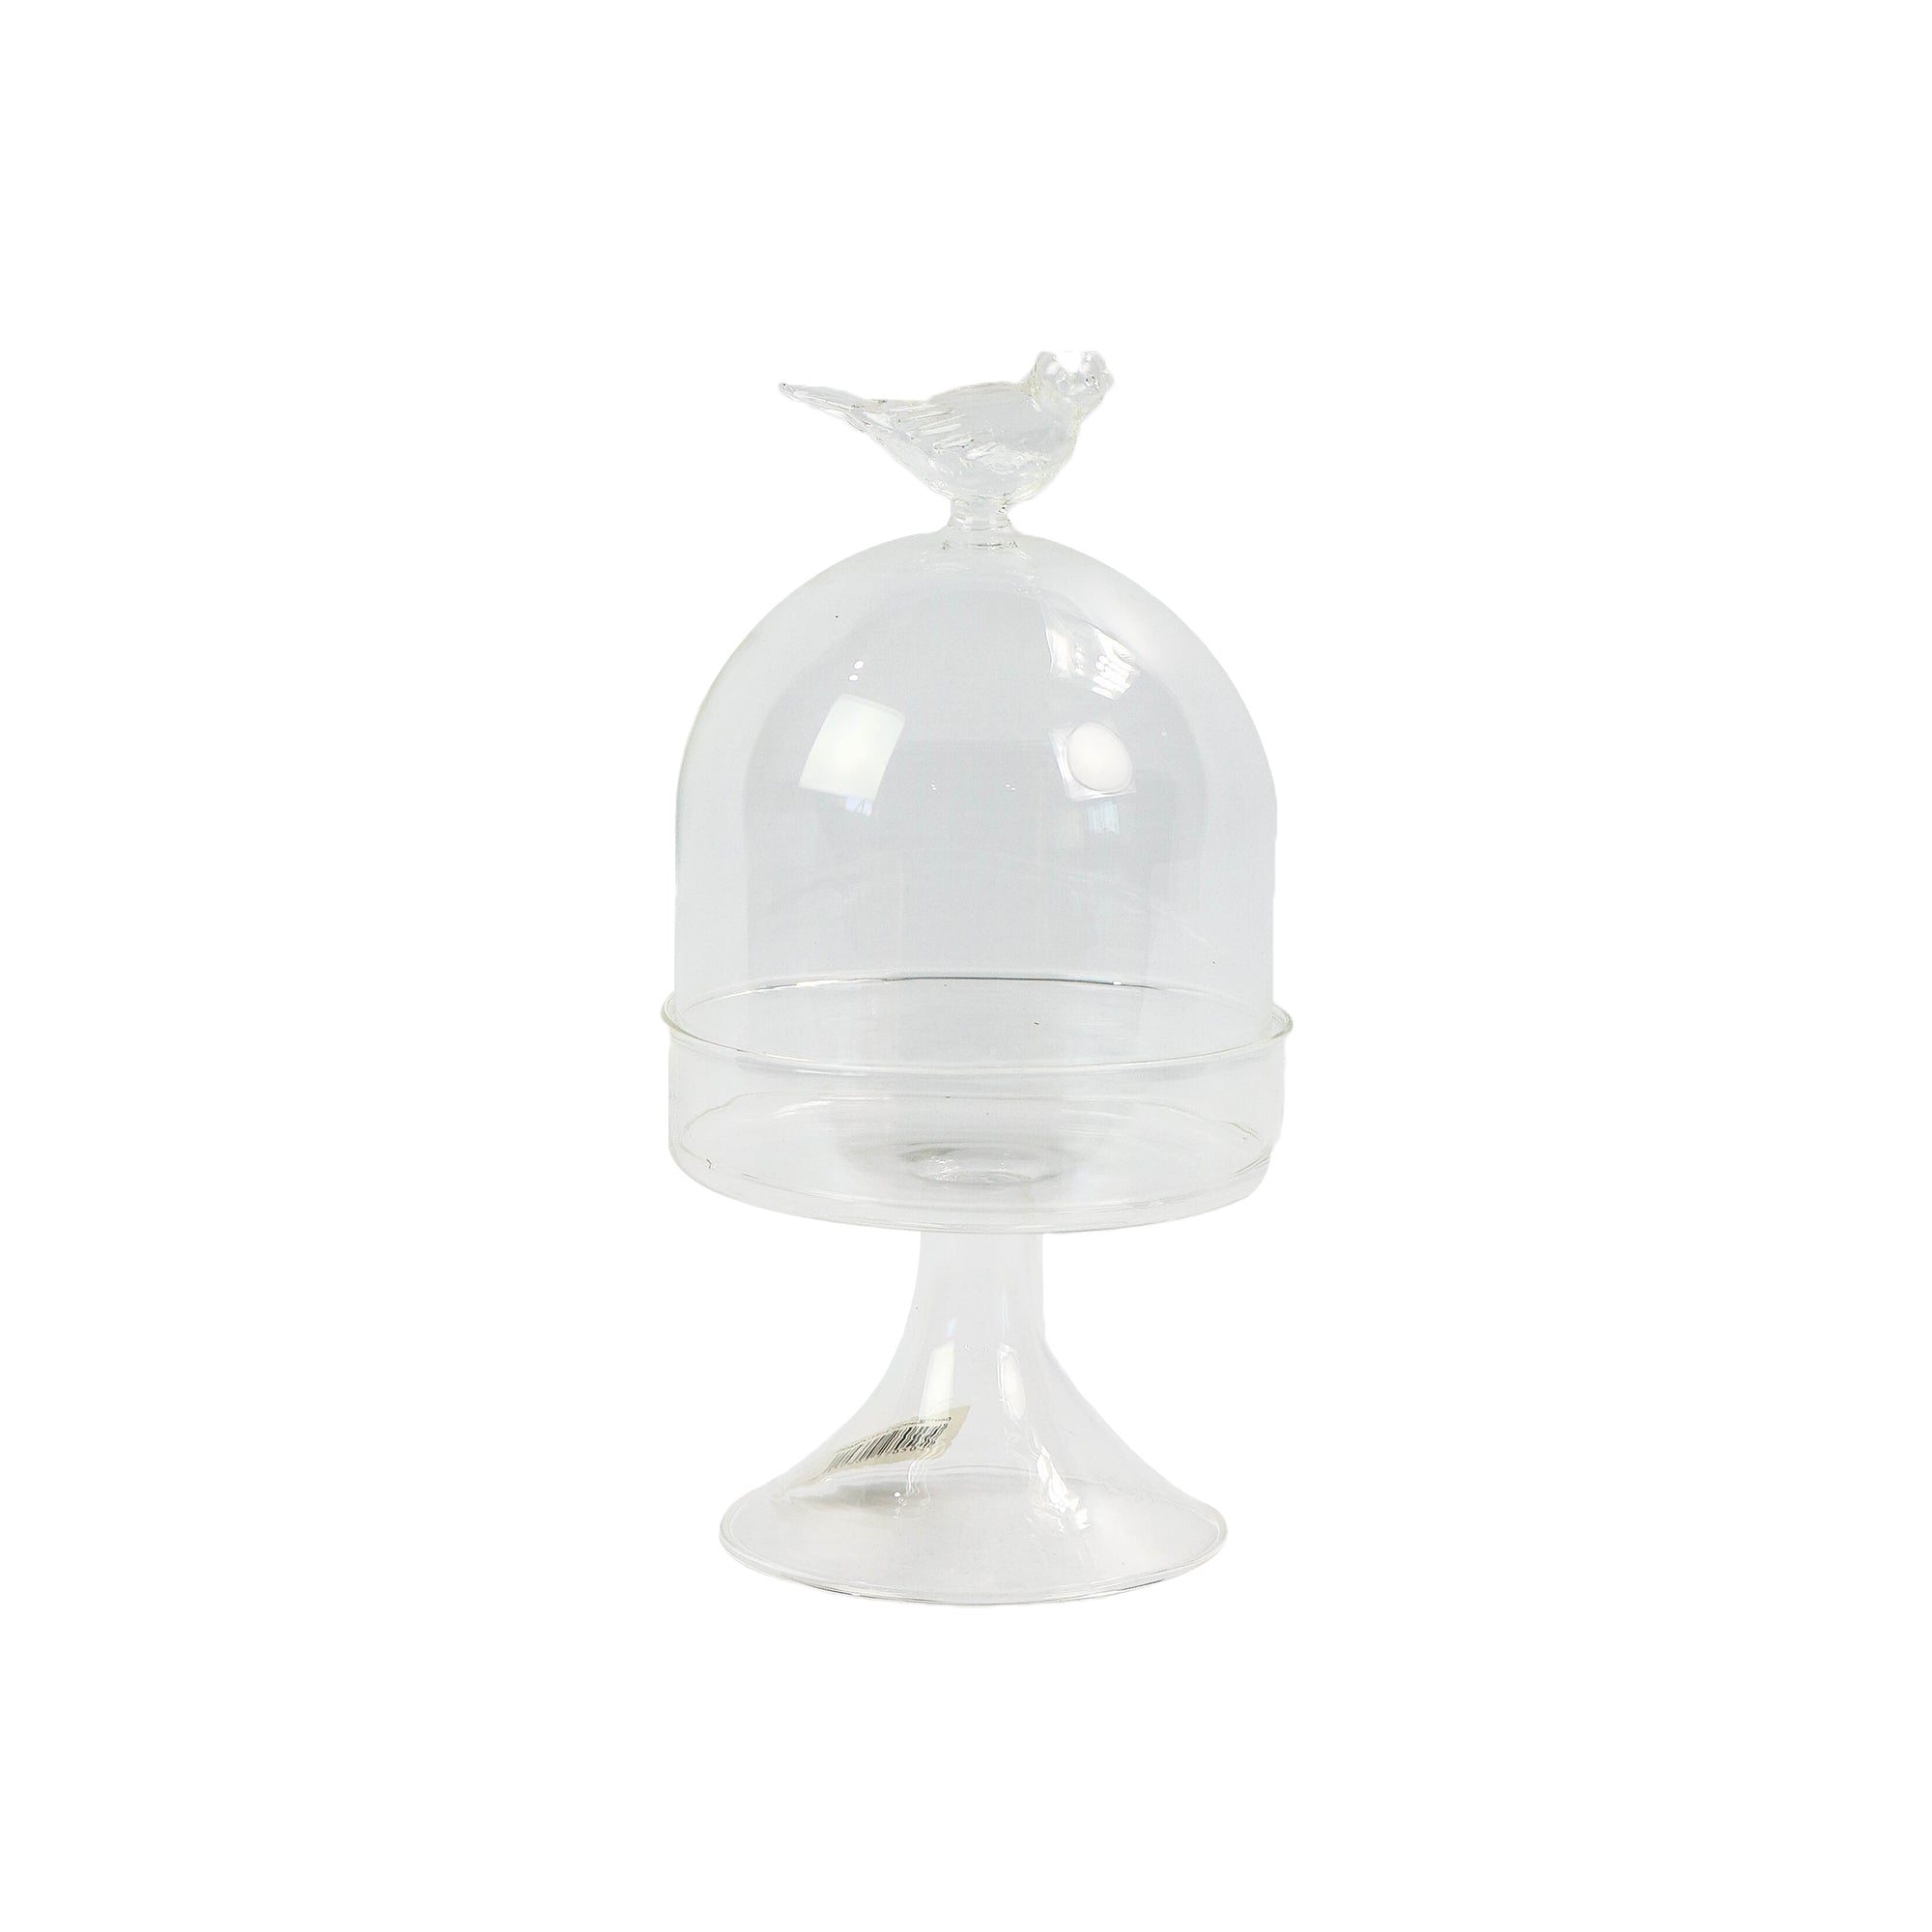 Patisserie Glass Cake Dome Footed Stand 24cm 27050